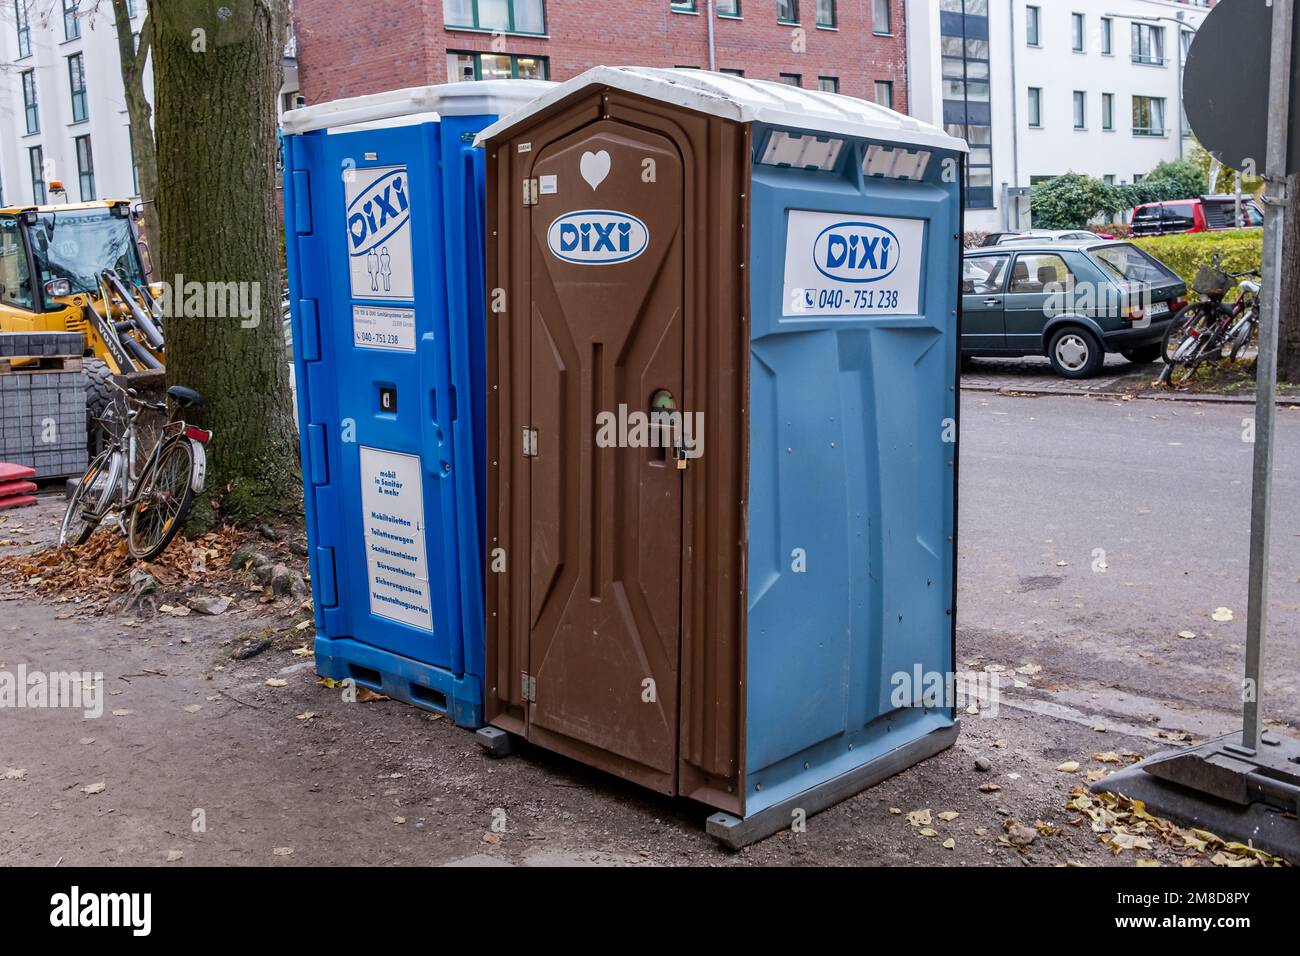 Hamburg, Germany - 12 03 2022: Two DIXI toilet cubicles on a construction site in Hamburg Germany Stock Photo